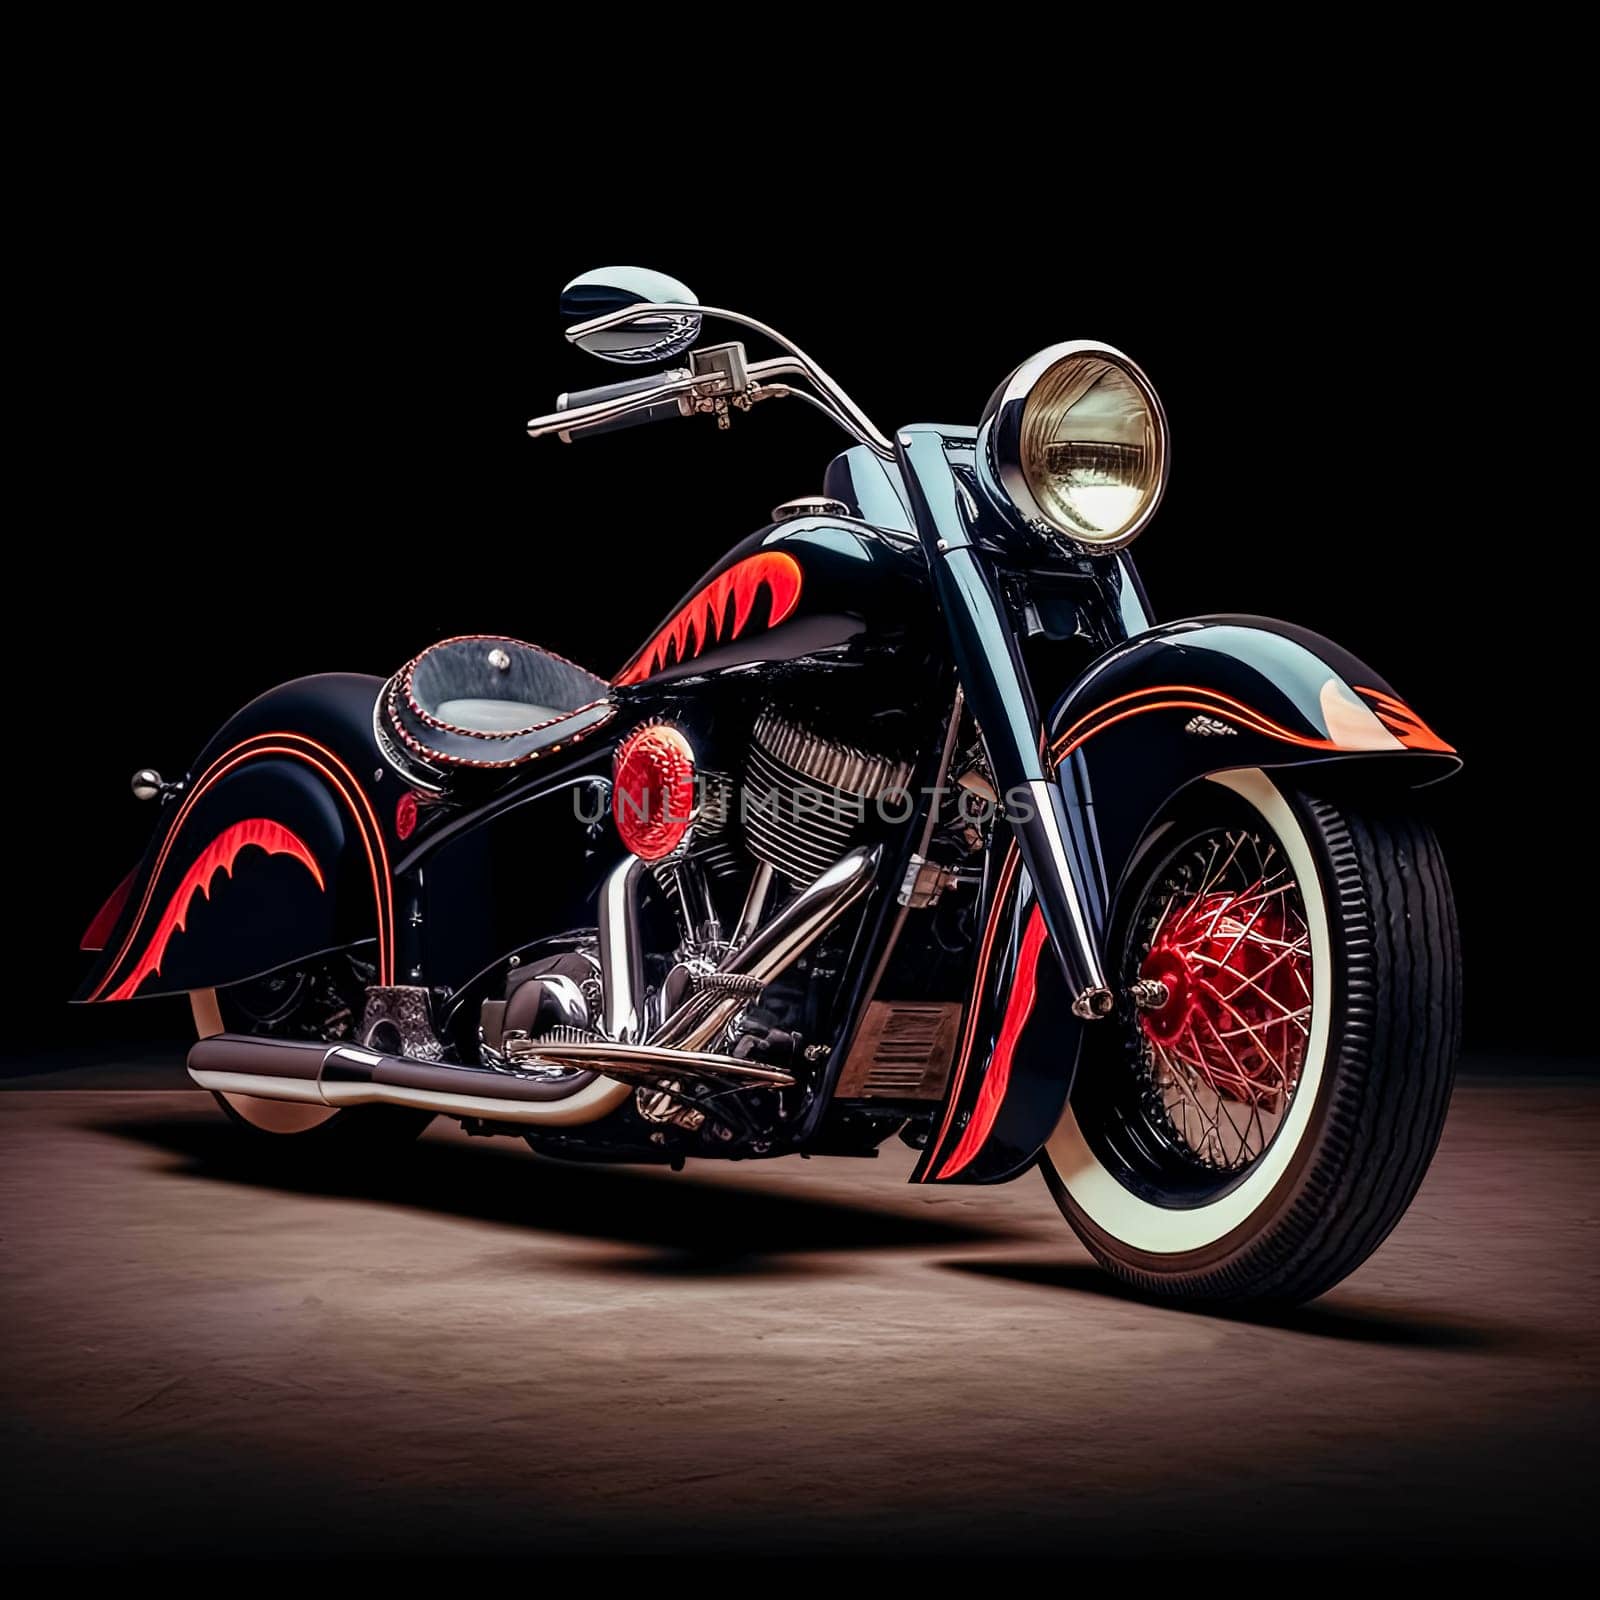 A black motorcycle with red accents is parked in front of a dark background. The motorcycle is the main focus of the image, and it is a custom or modified bike